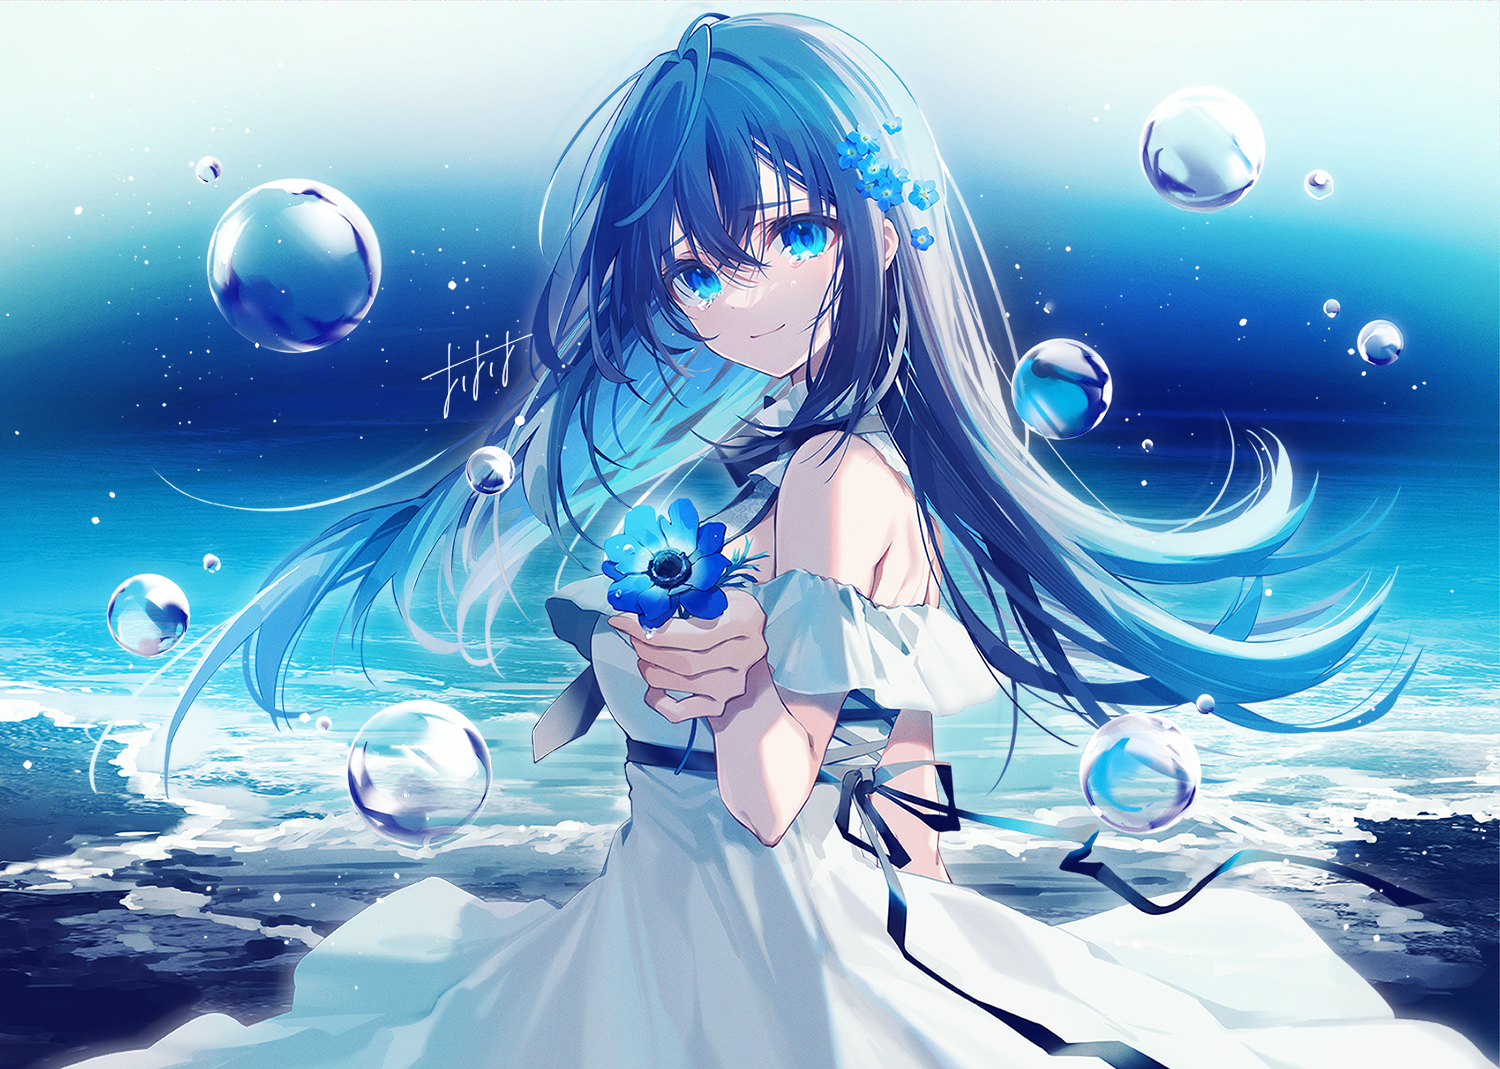 Anime 1500x1069 anime anime girls blue hair blue eyes Water Enchantress of the Temple bubbles flowers dress water